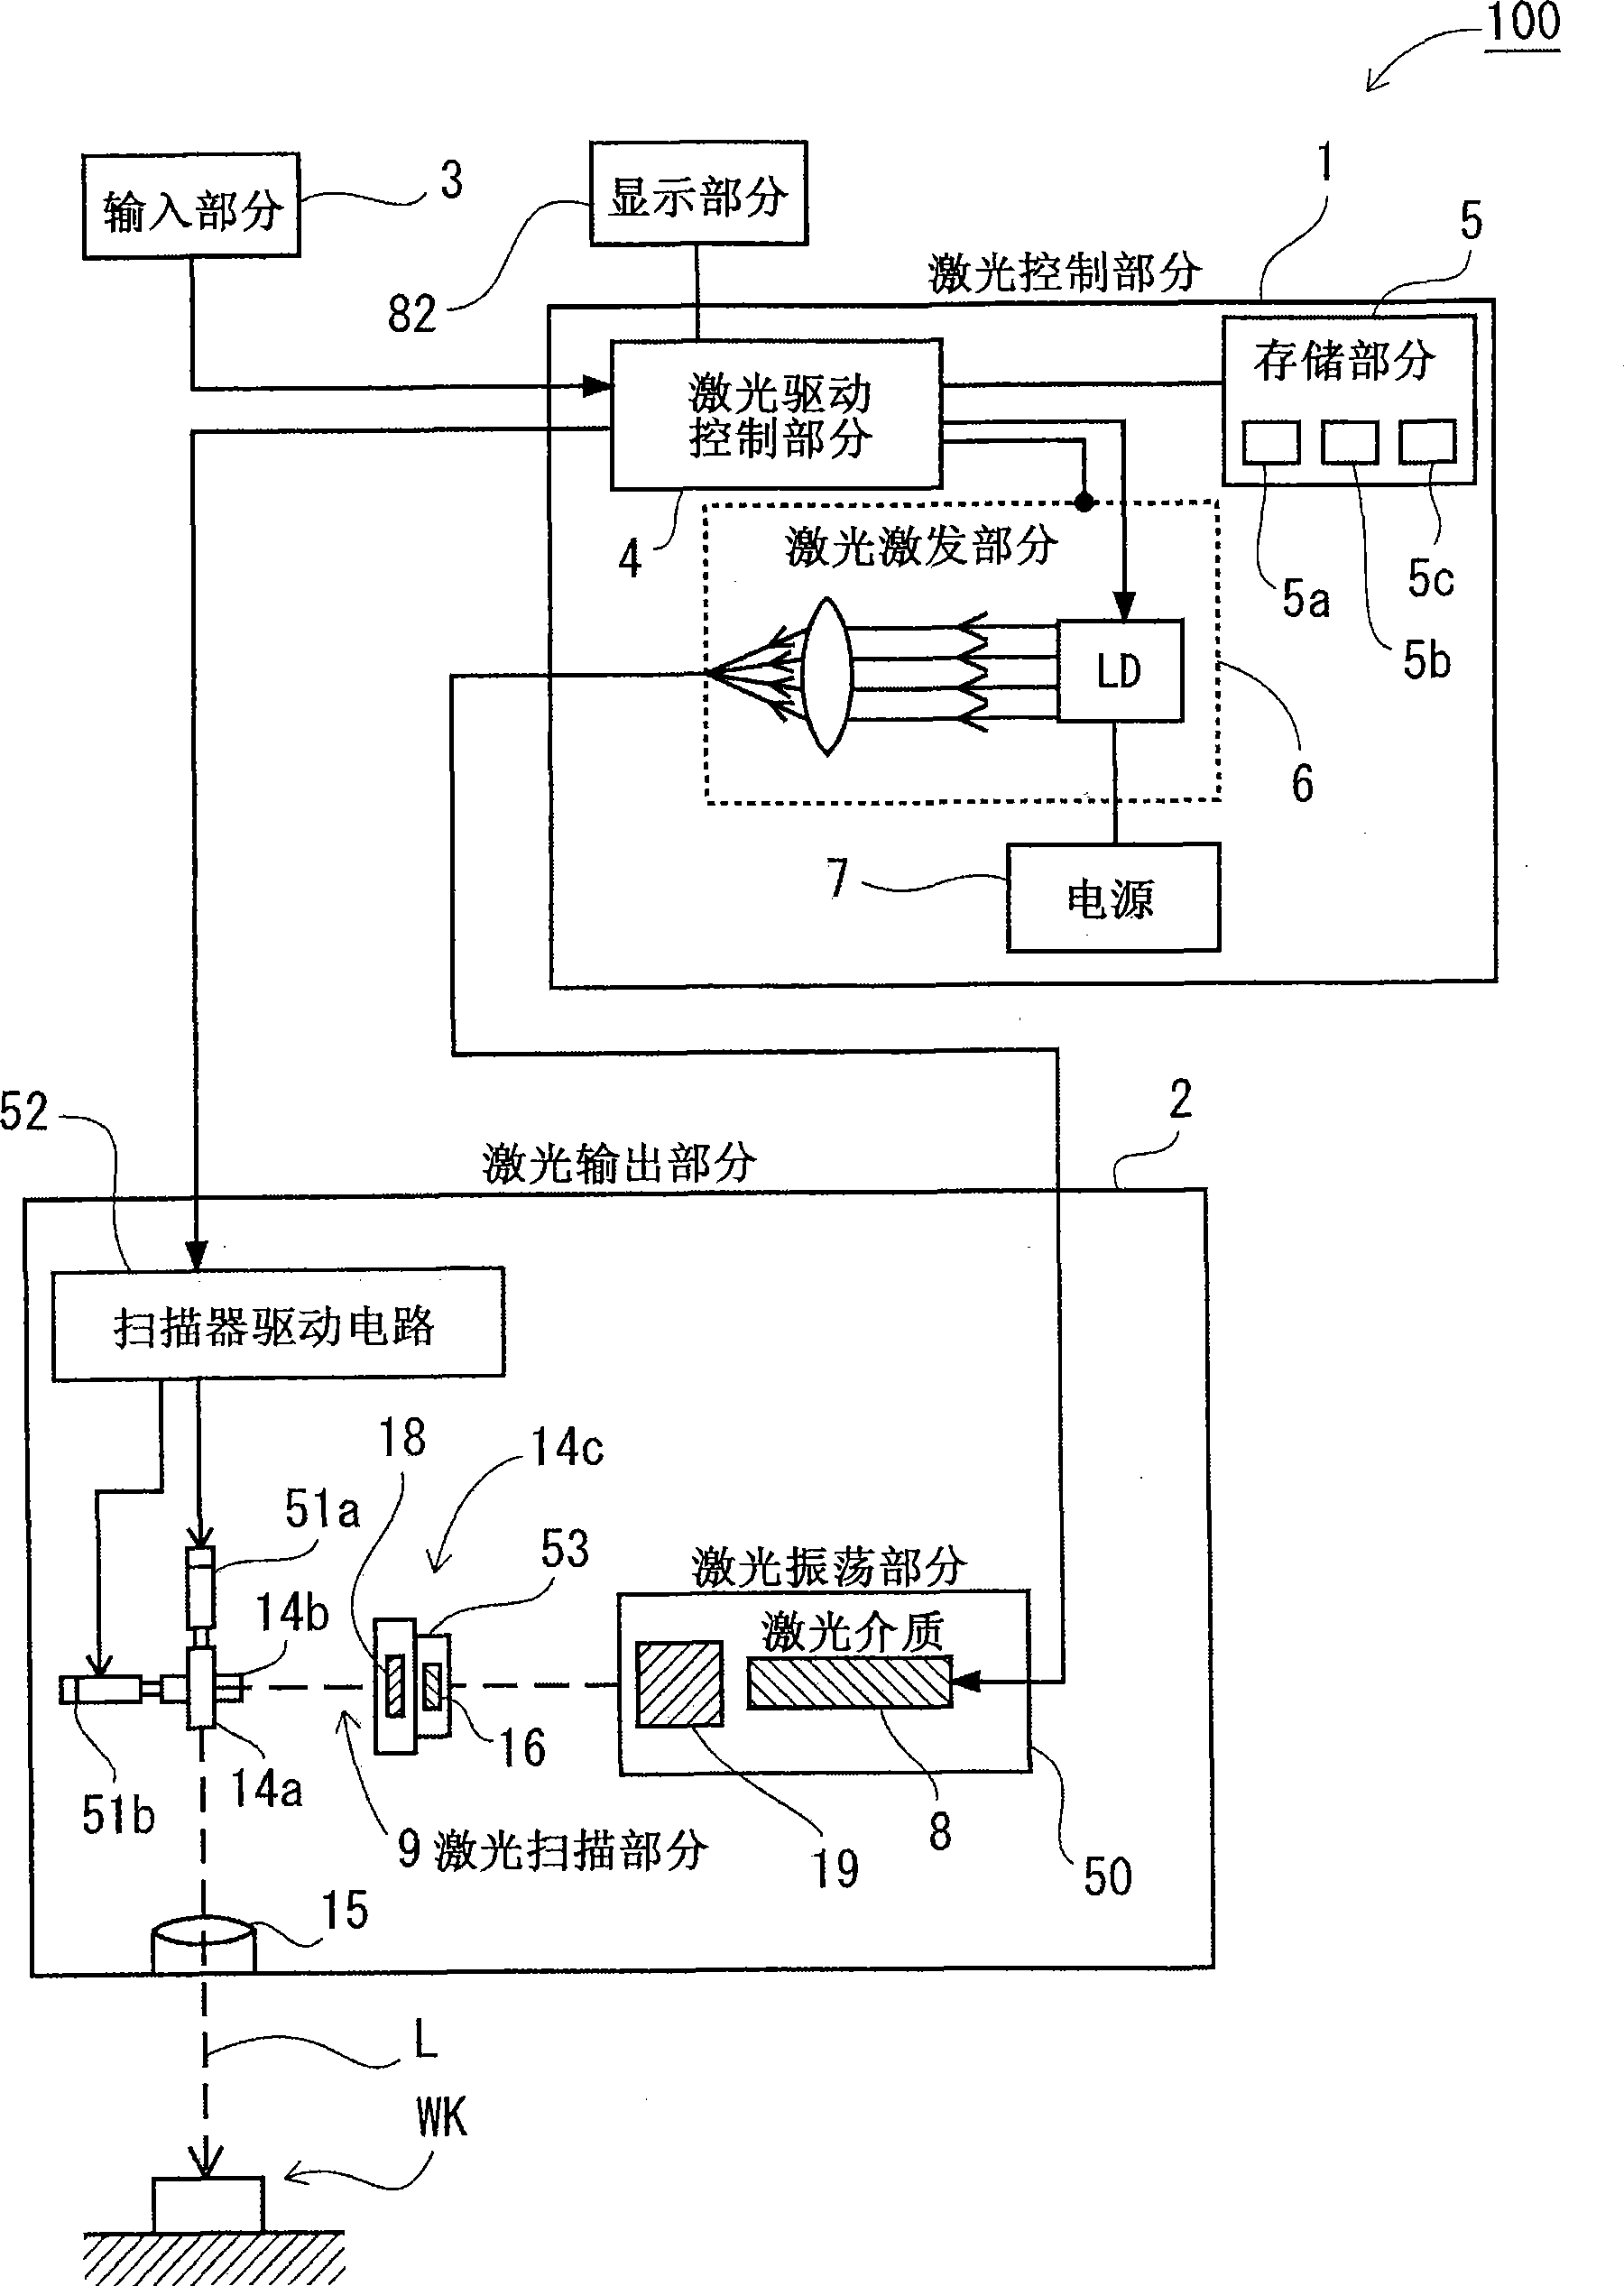 Laser processing apparatus, laser processing method, and method for making settings for laser processing apparatus